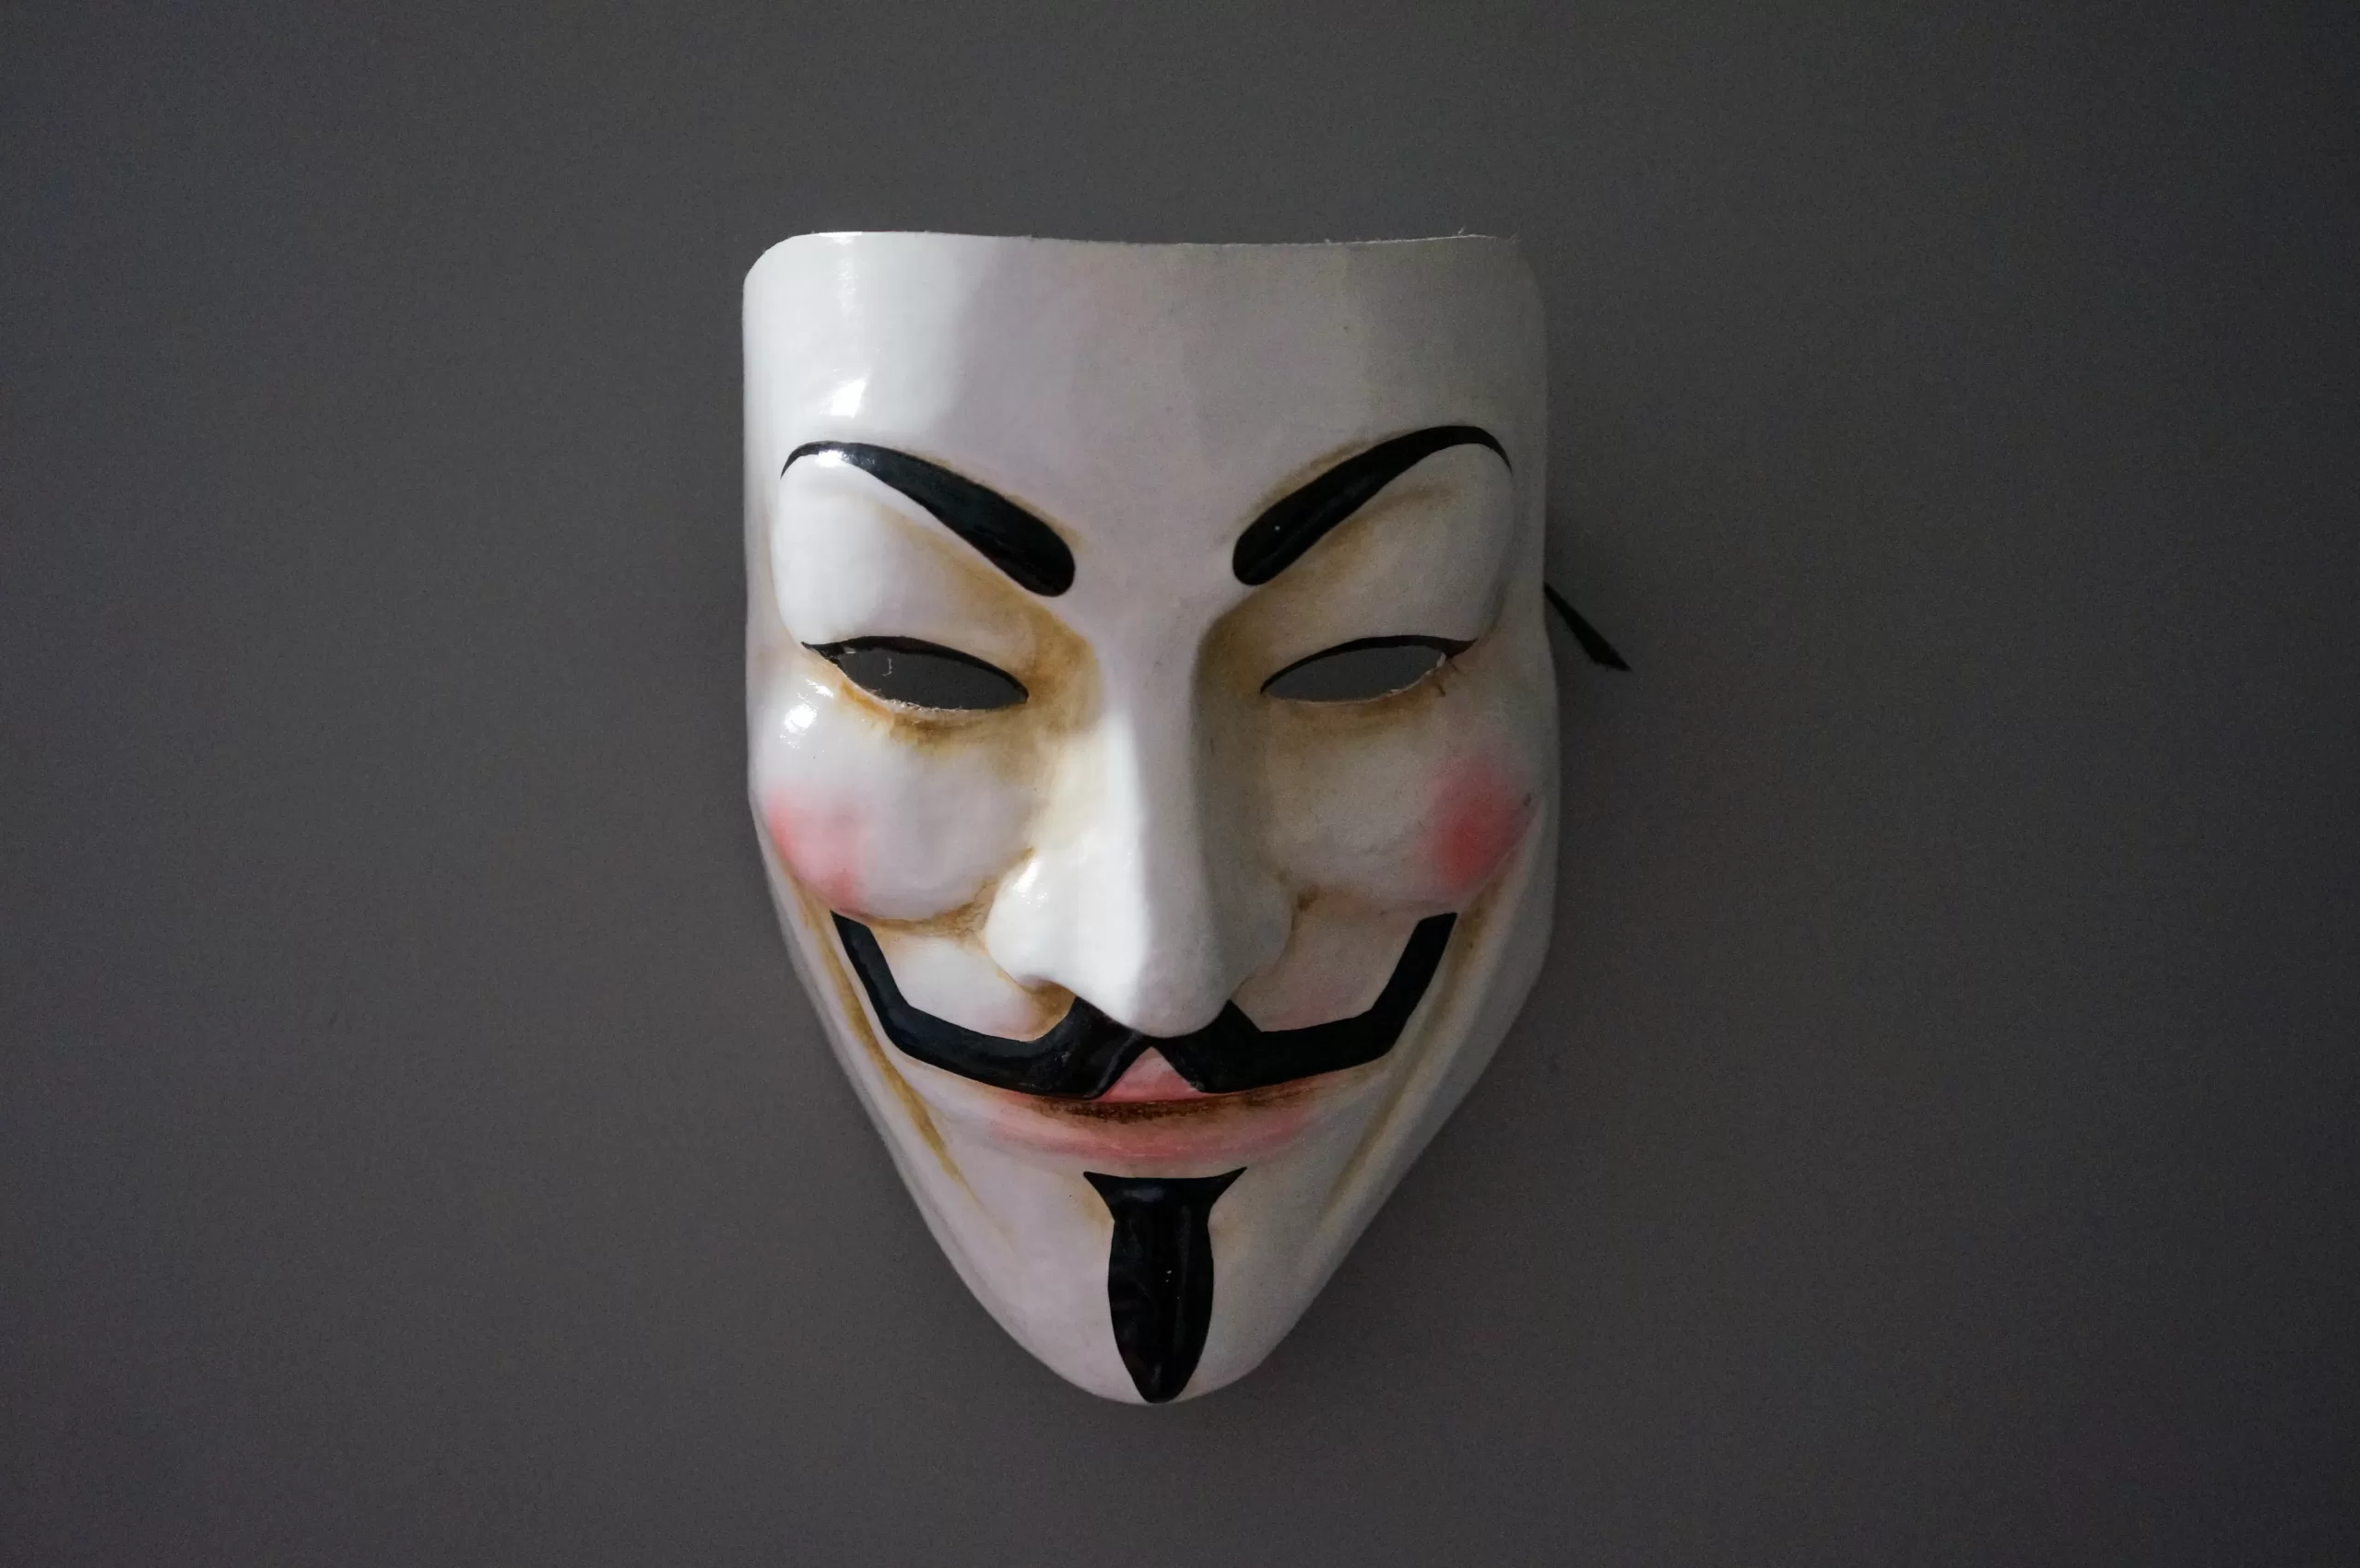 Guy Fawkes mask hanged in a grey wall.